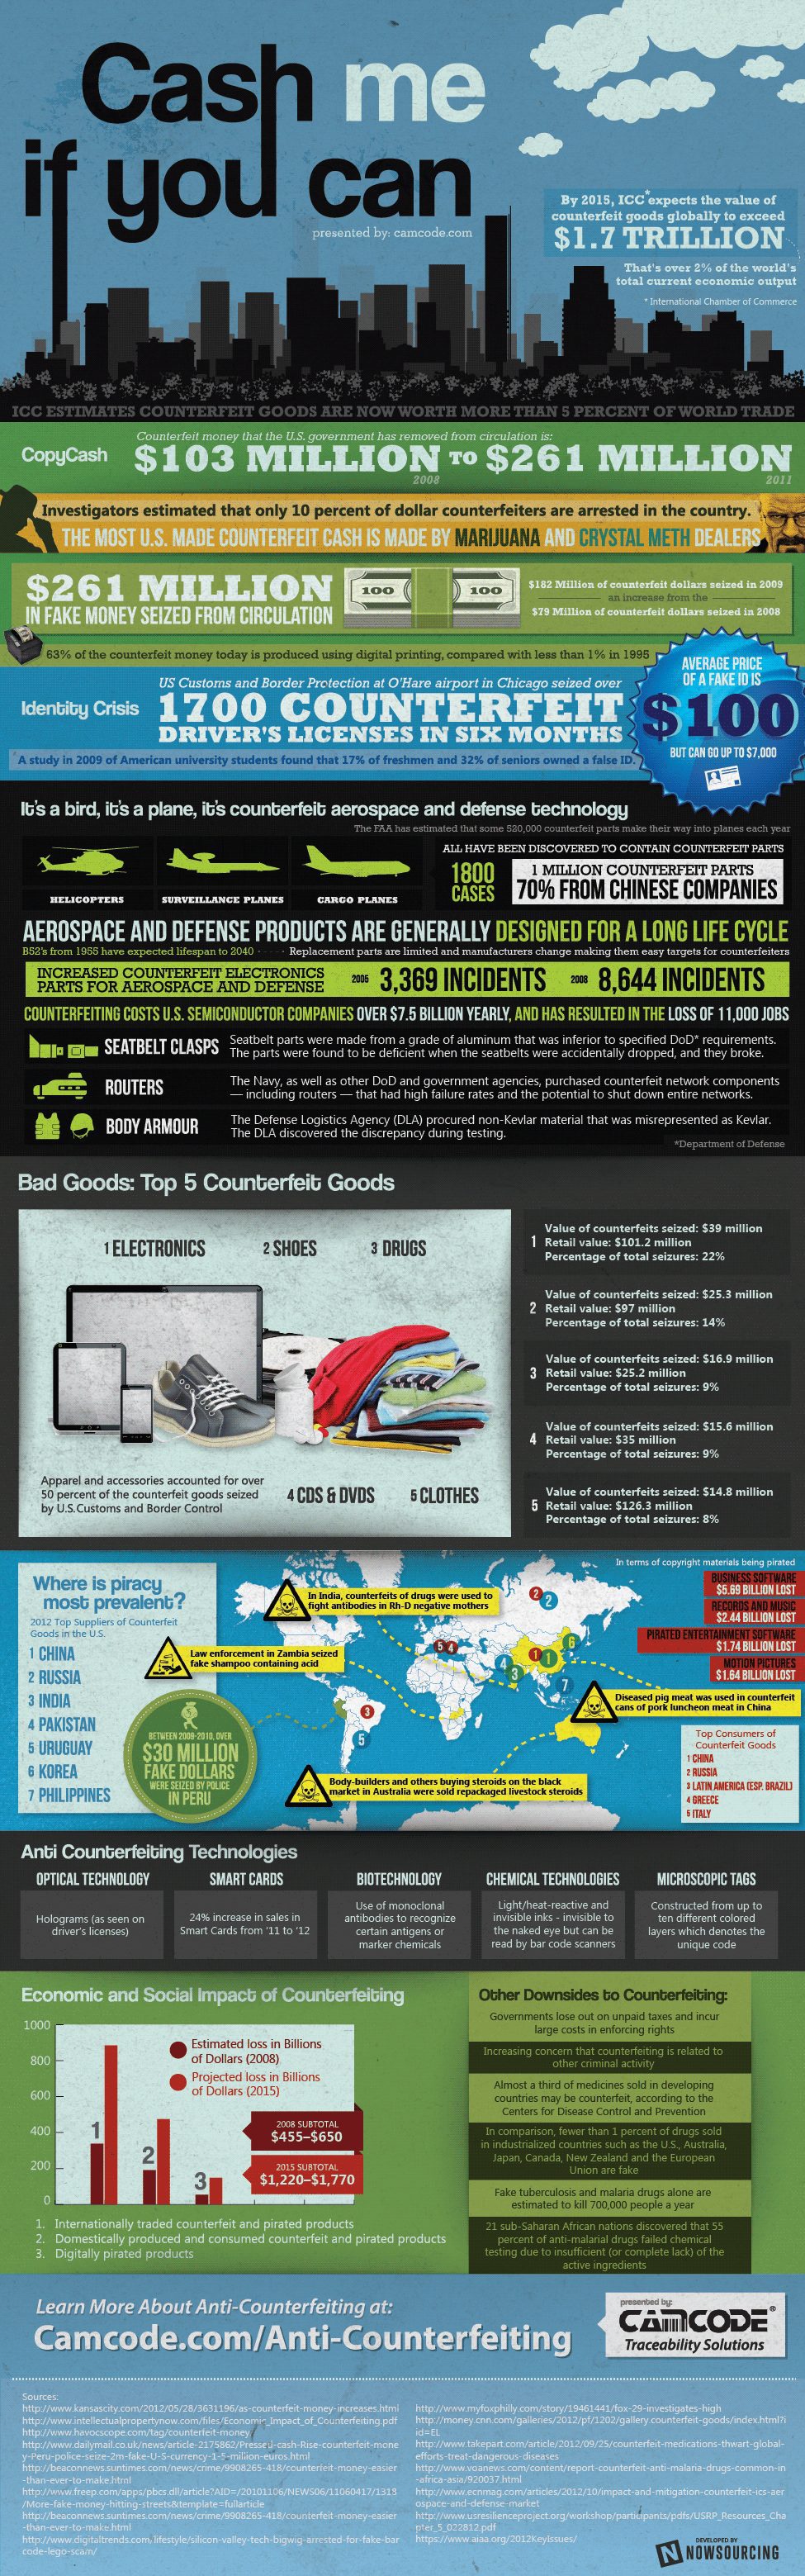 infographic on counterfeiting and anti-counterfeiting measures